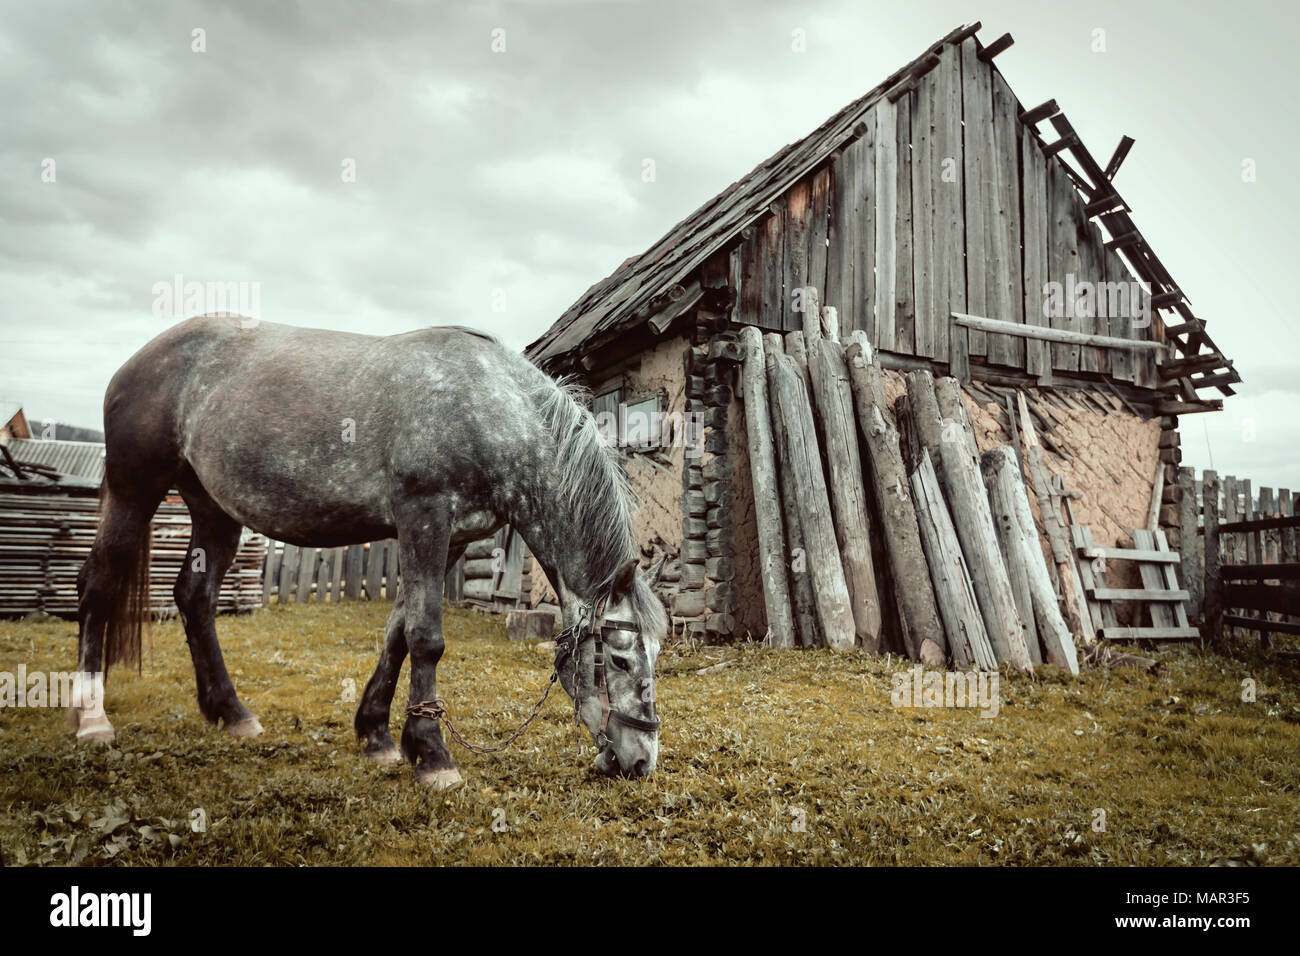 A horse on a farm is standing in front of an old wooden house. Processing in retro style or vintage for design and creativity Stock Photo